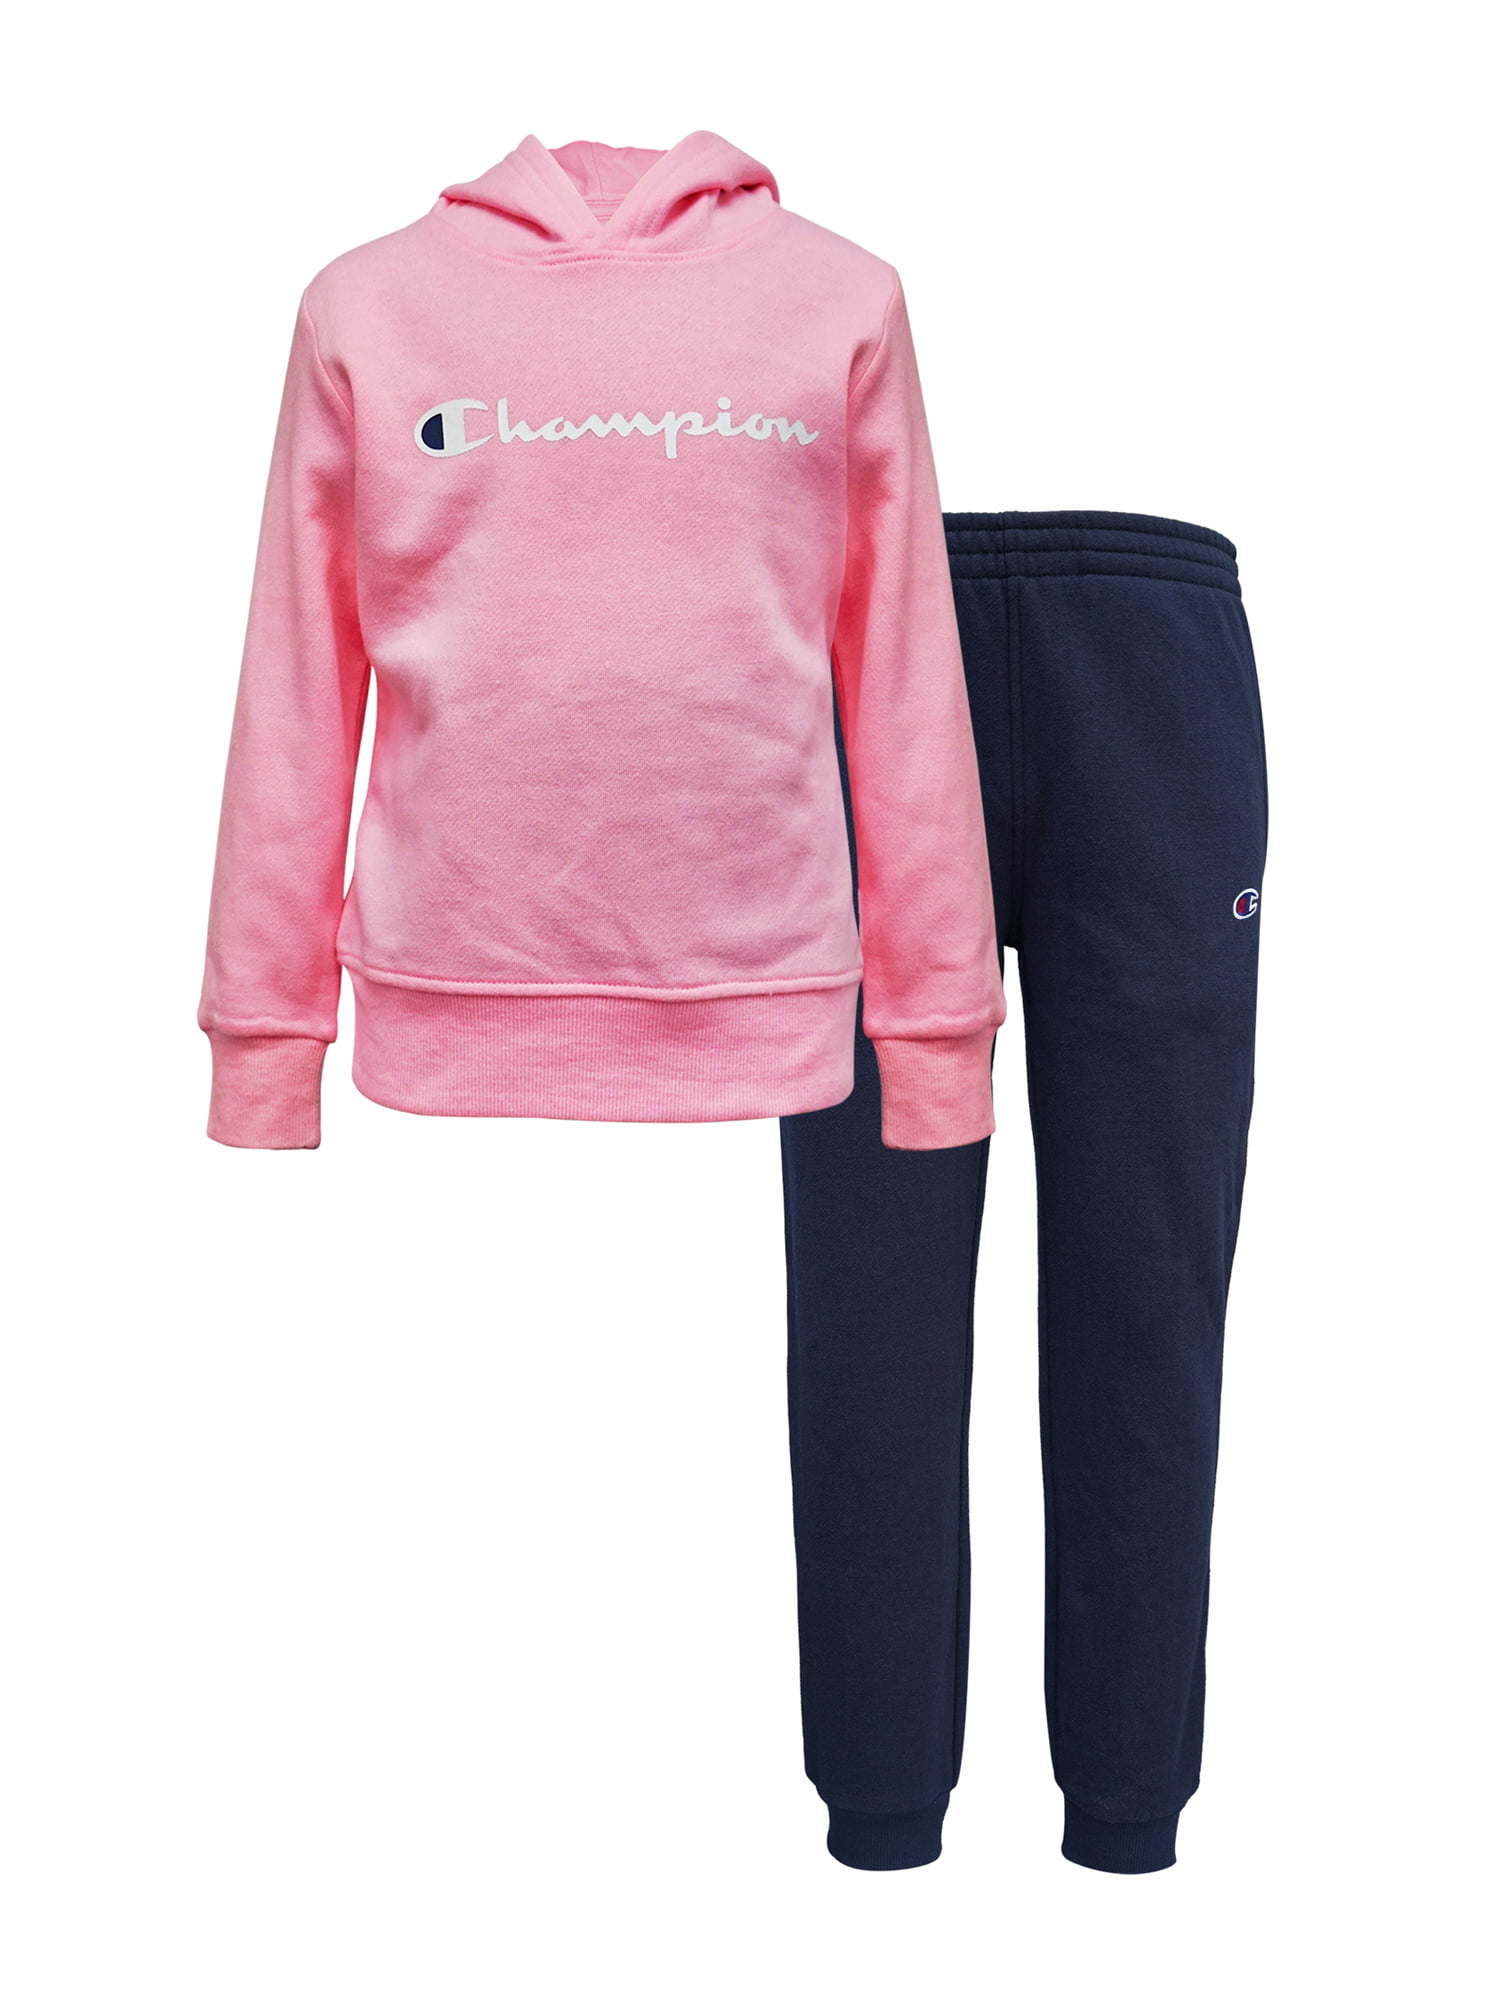 Champion Girls 2T-6X Fleece Hoodie and Jogger Sweatpant, 2-Piece Active ...